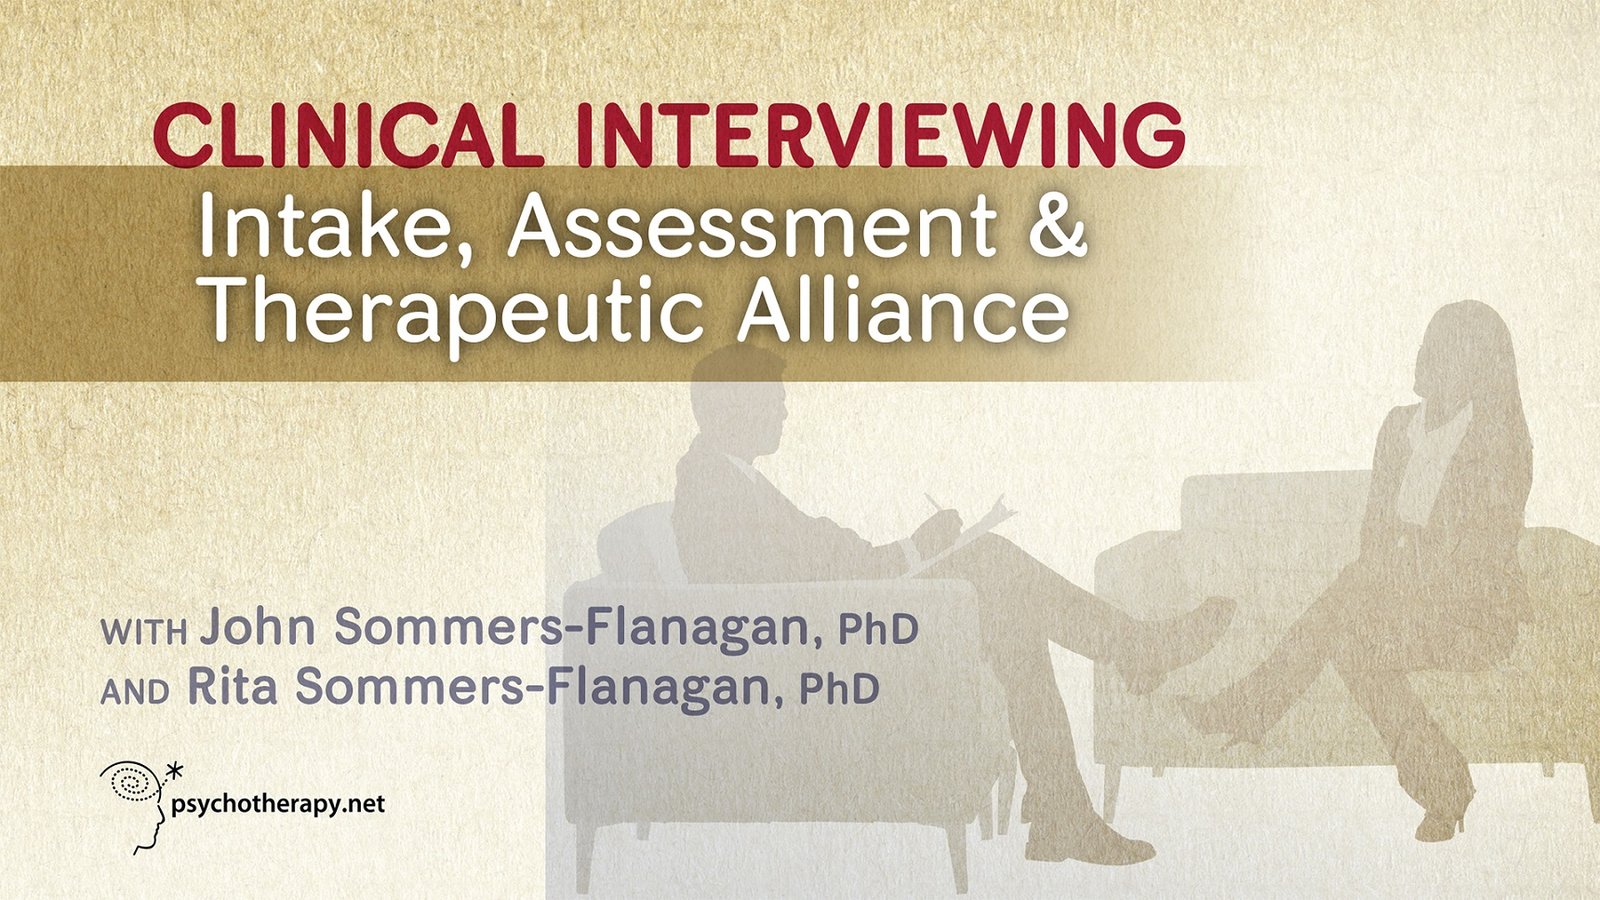 Clinical Interviewing: Intake, Assessment & Therapeutic Alliance